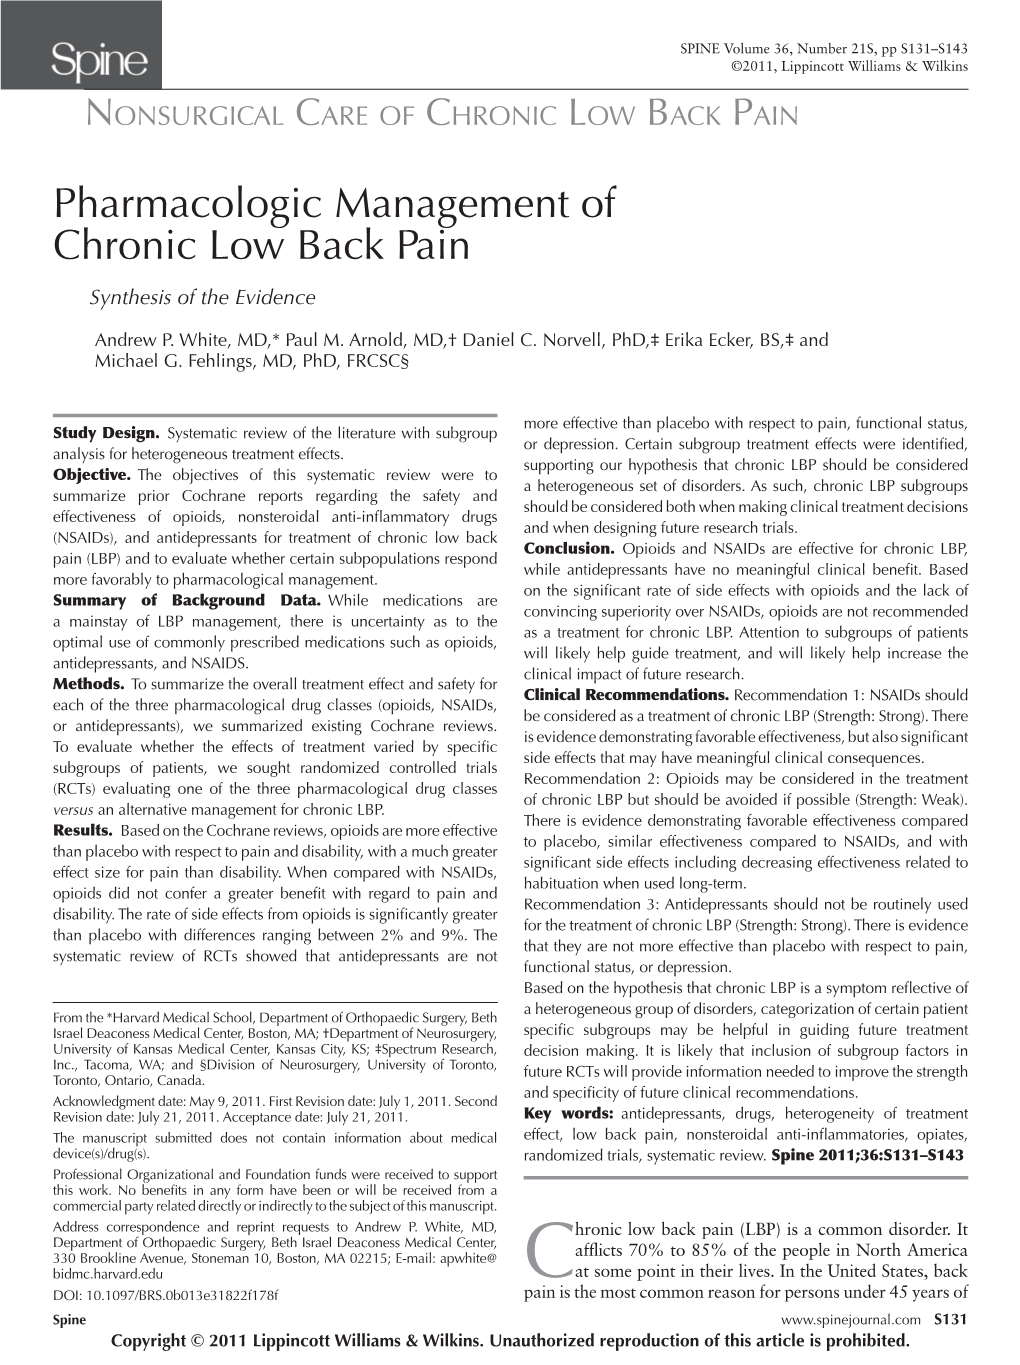 Pharmacologic Management of Chronic Low Back Pain Synthesis of the Evidence